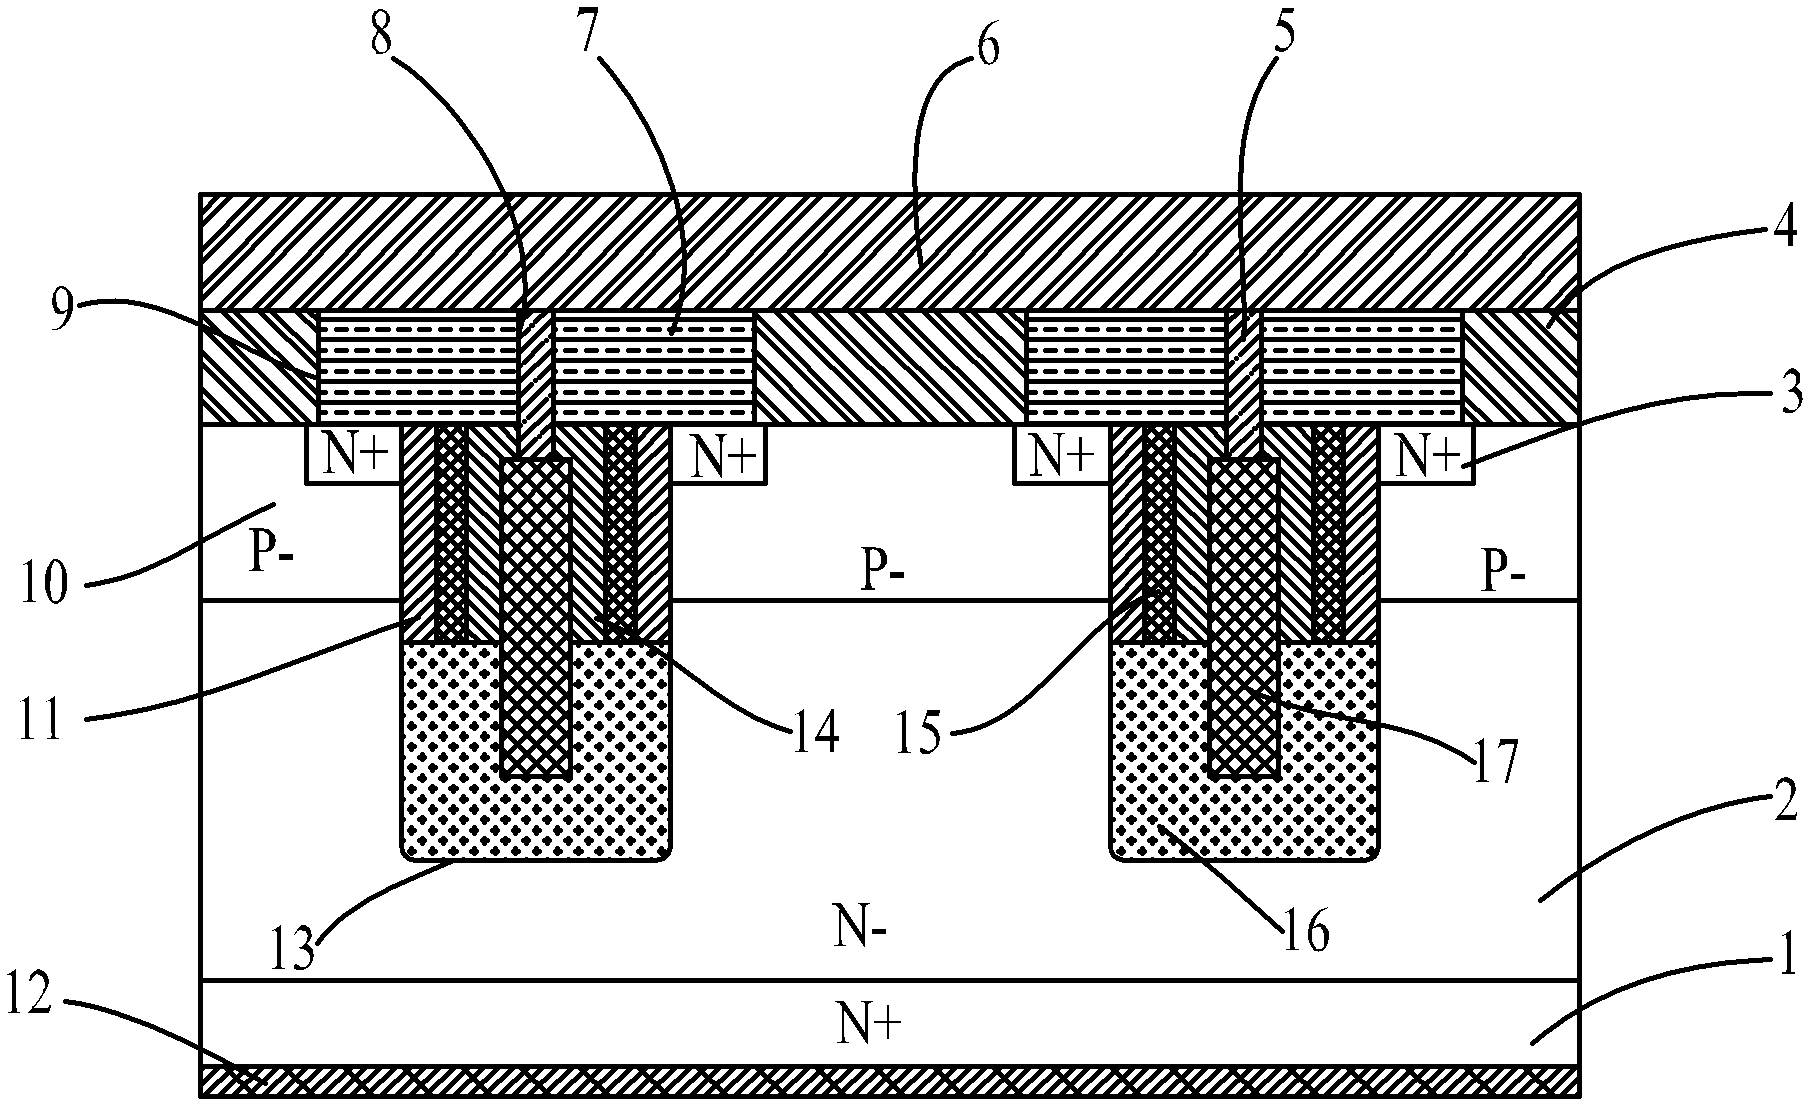 A novel trench structure power mosfet device and its manufacturing method